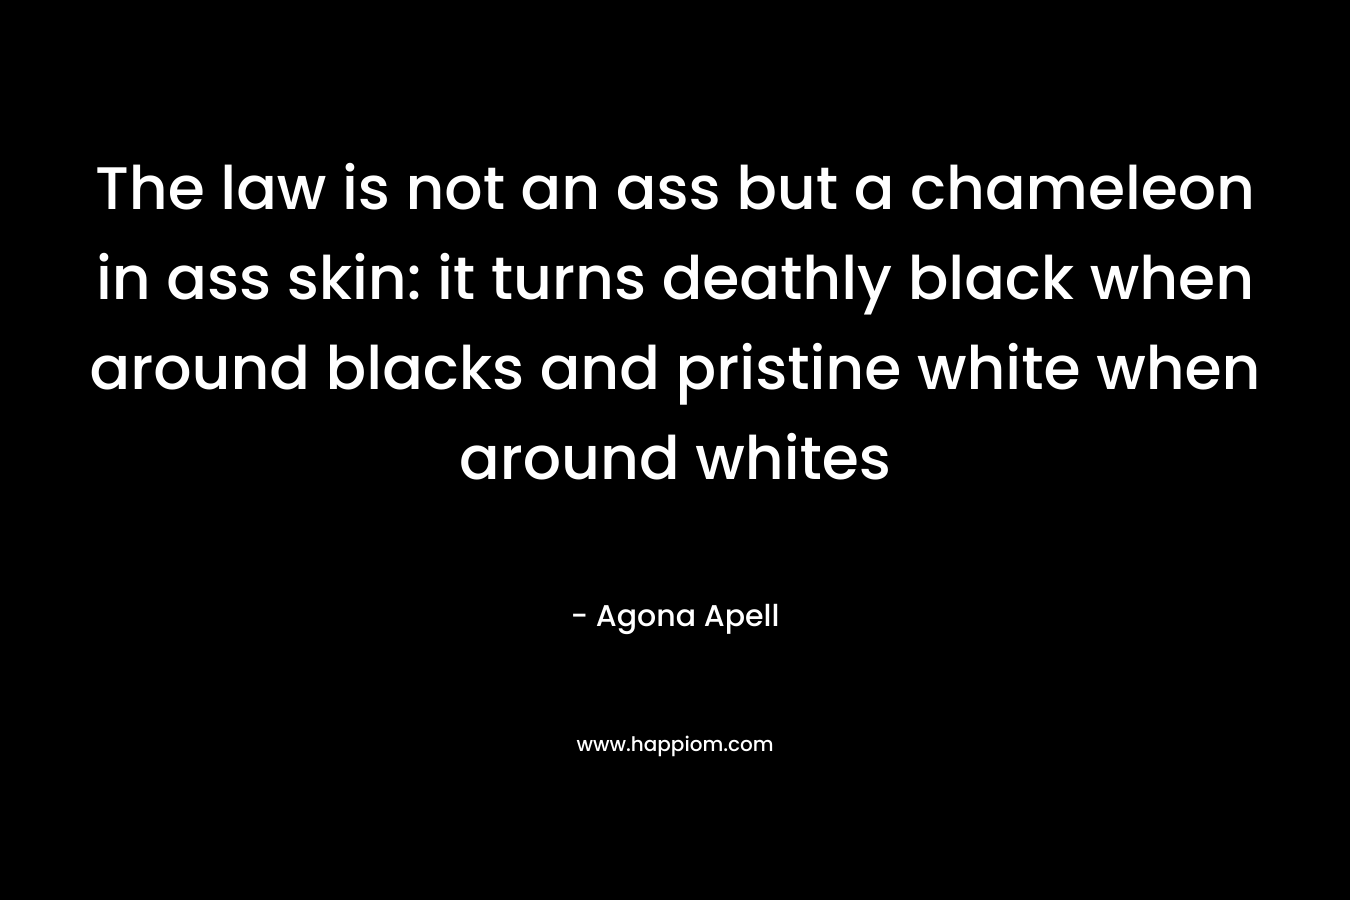 The law is not an ass but a chameleon in ass skin: it turns deathly black when around blacks and pristine white when around whites – Agona Apell